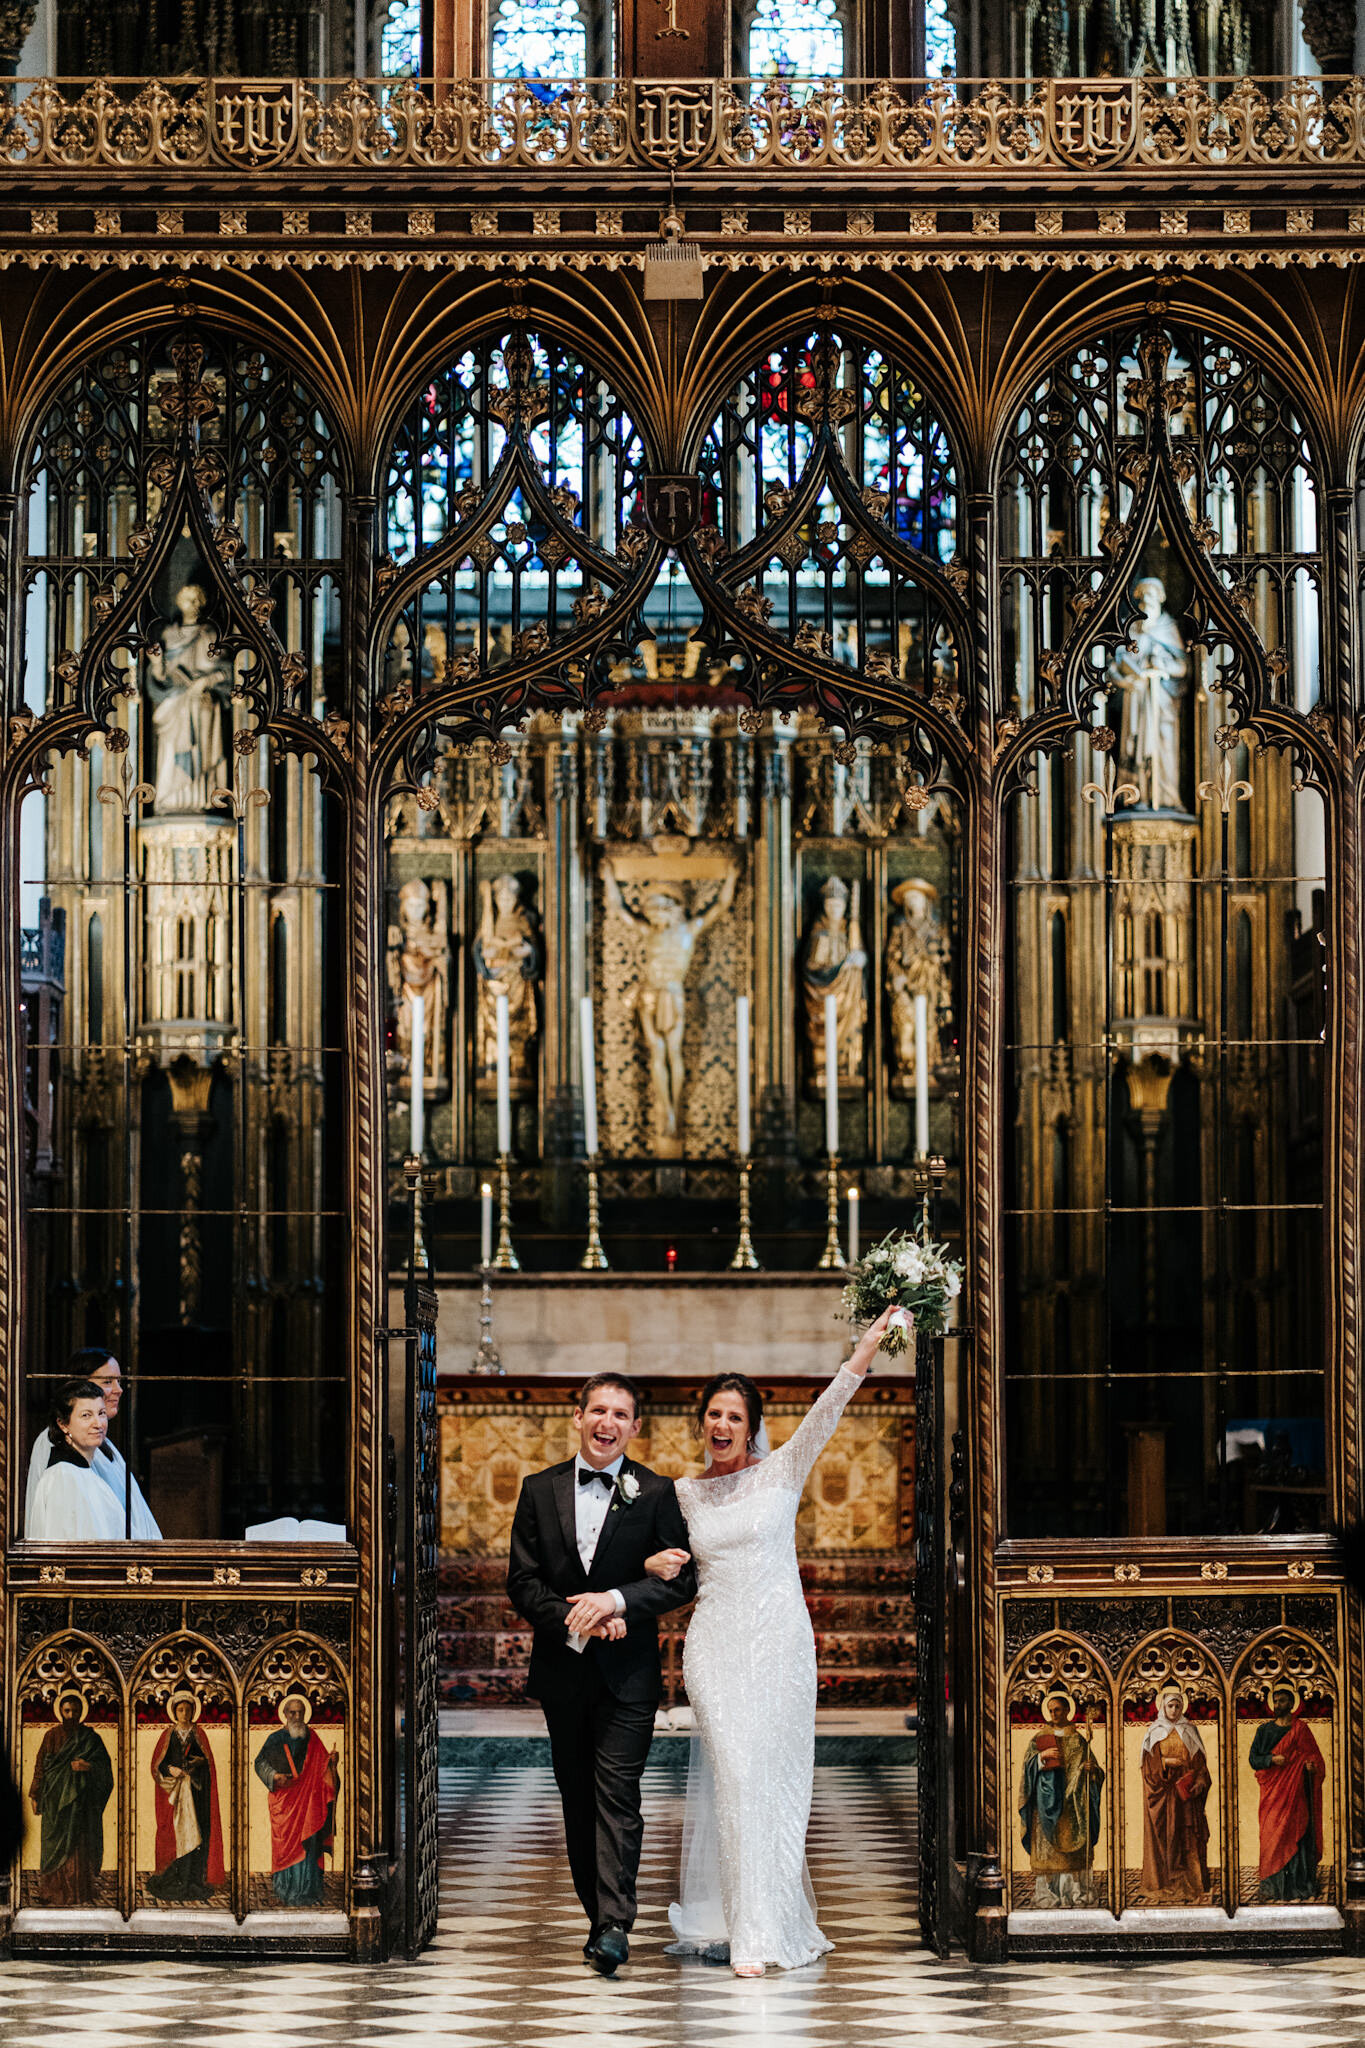 Bride and groom walk back down the aisle as a married couple at St Pauls Knightsbridge as bride throws her hands up into the air